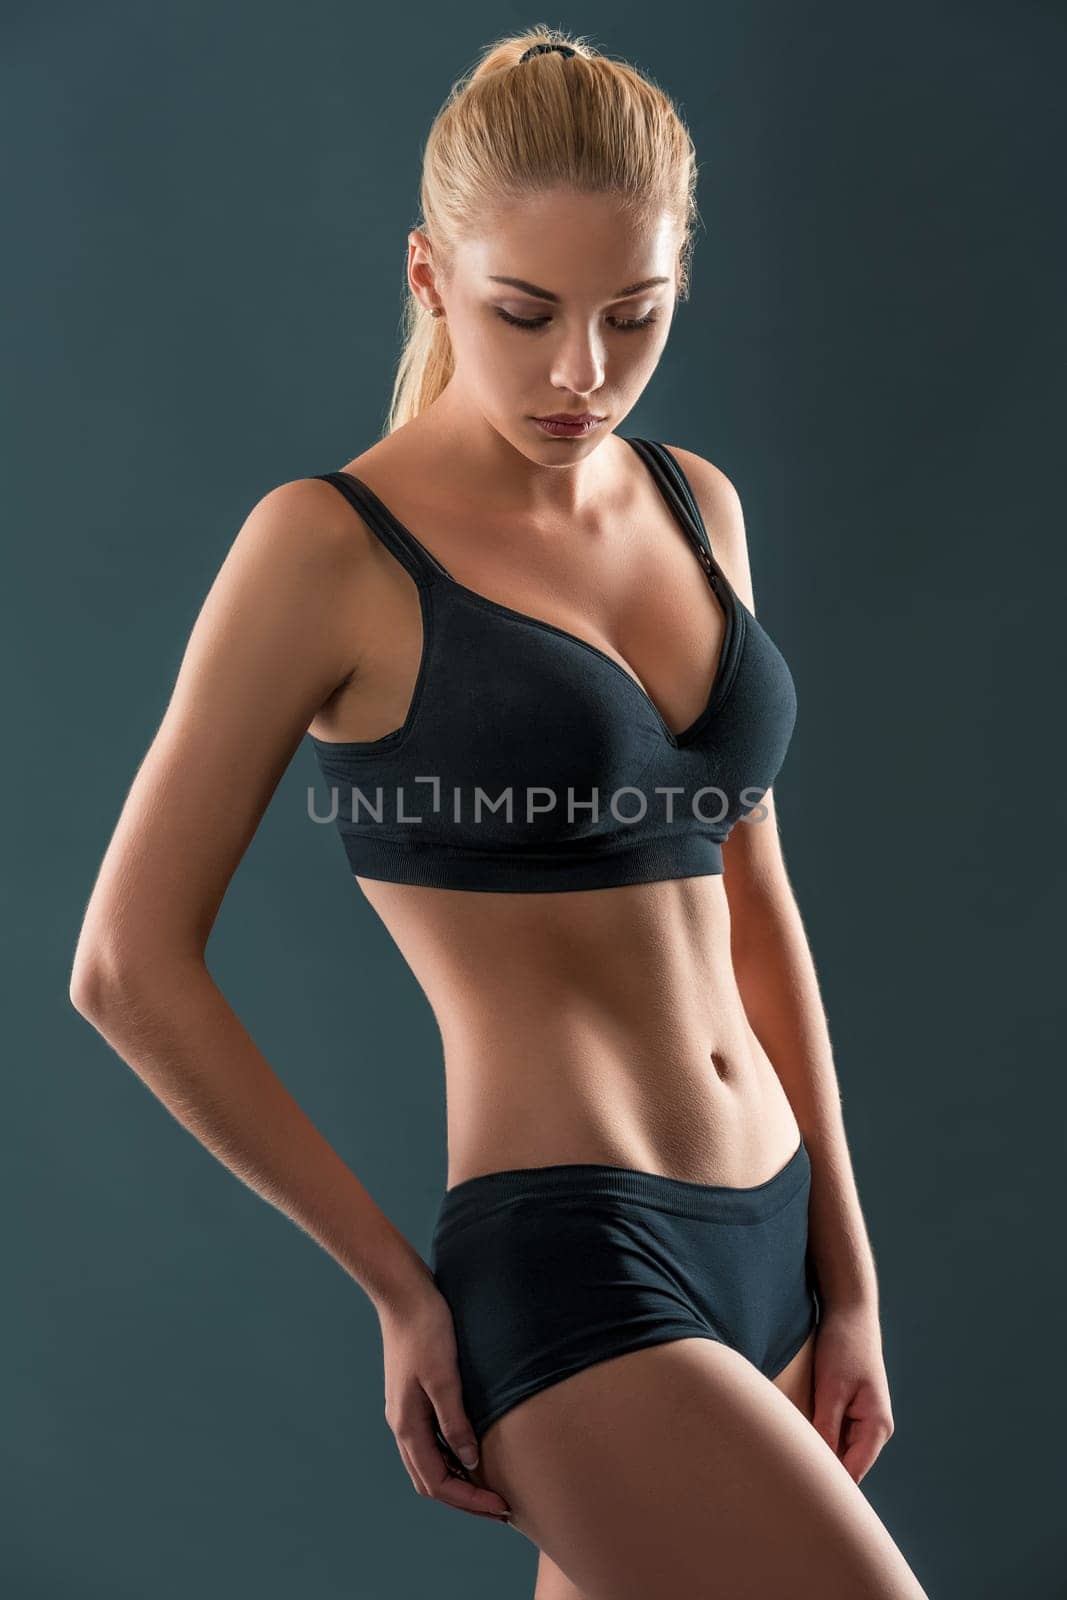 Young beautiful woman in fitness wear trained female body, lifestyle portrait, caucasian model